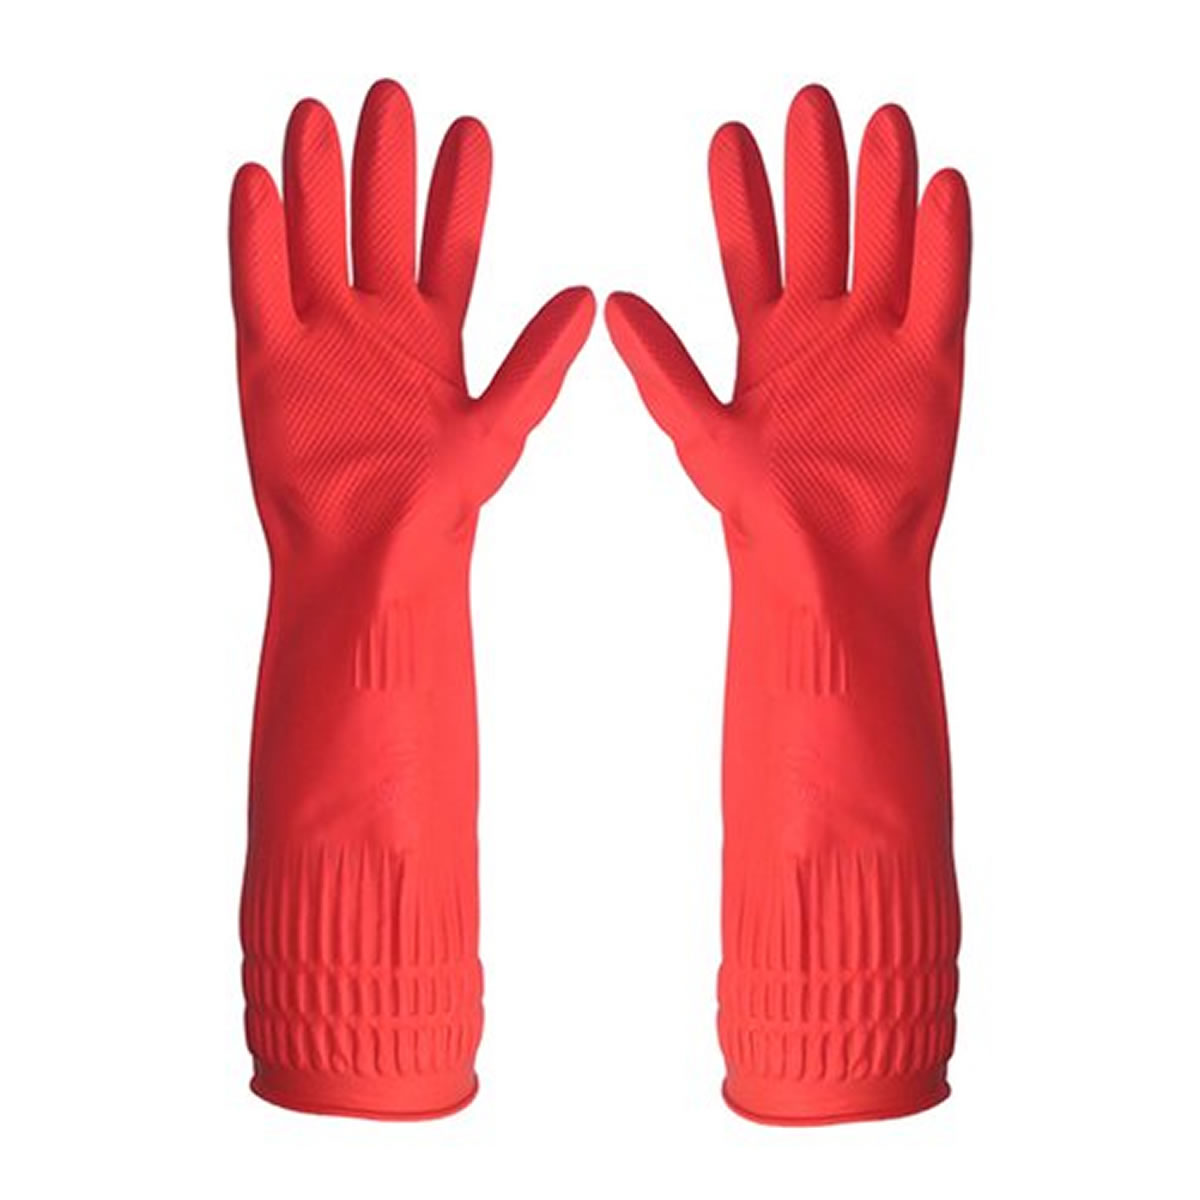 https://www.poly.my/wp-content/uploads/2020/10/Butterfly-red-Rubber-Glove.jpg